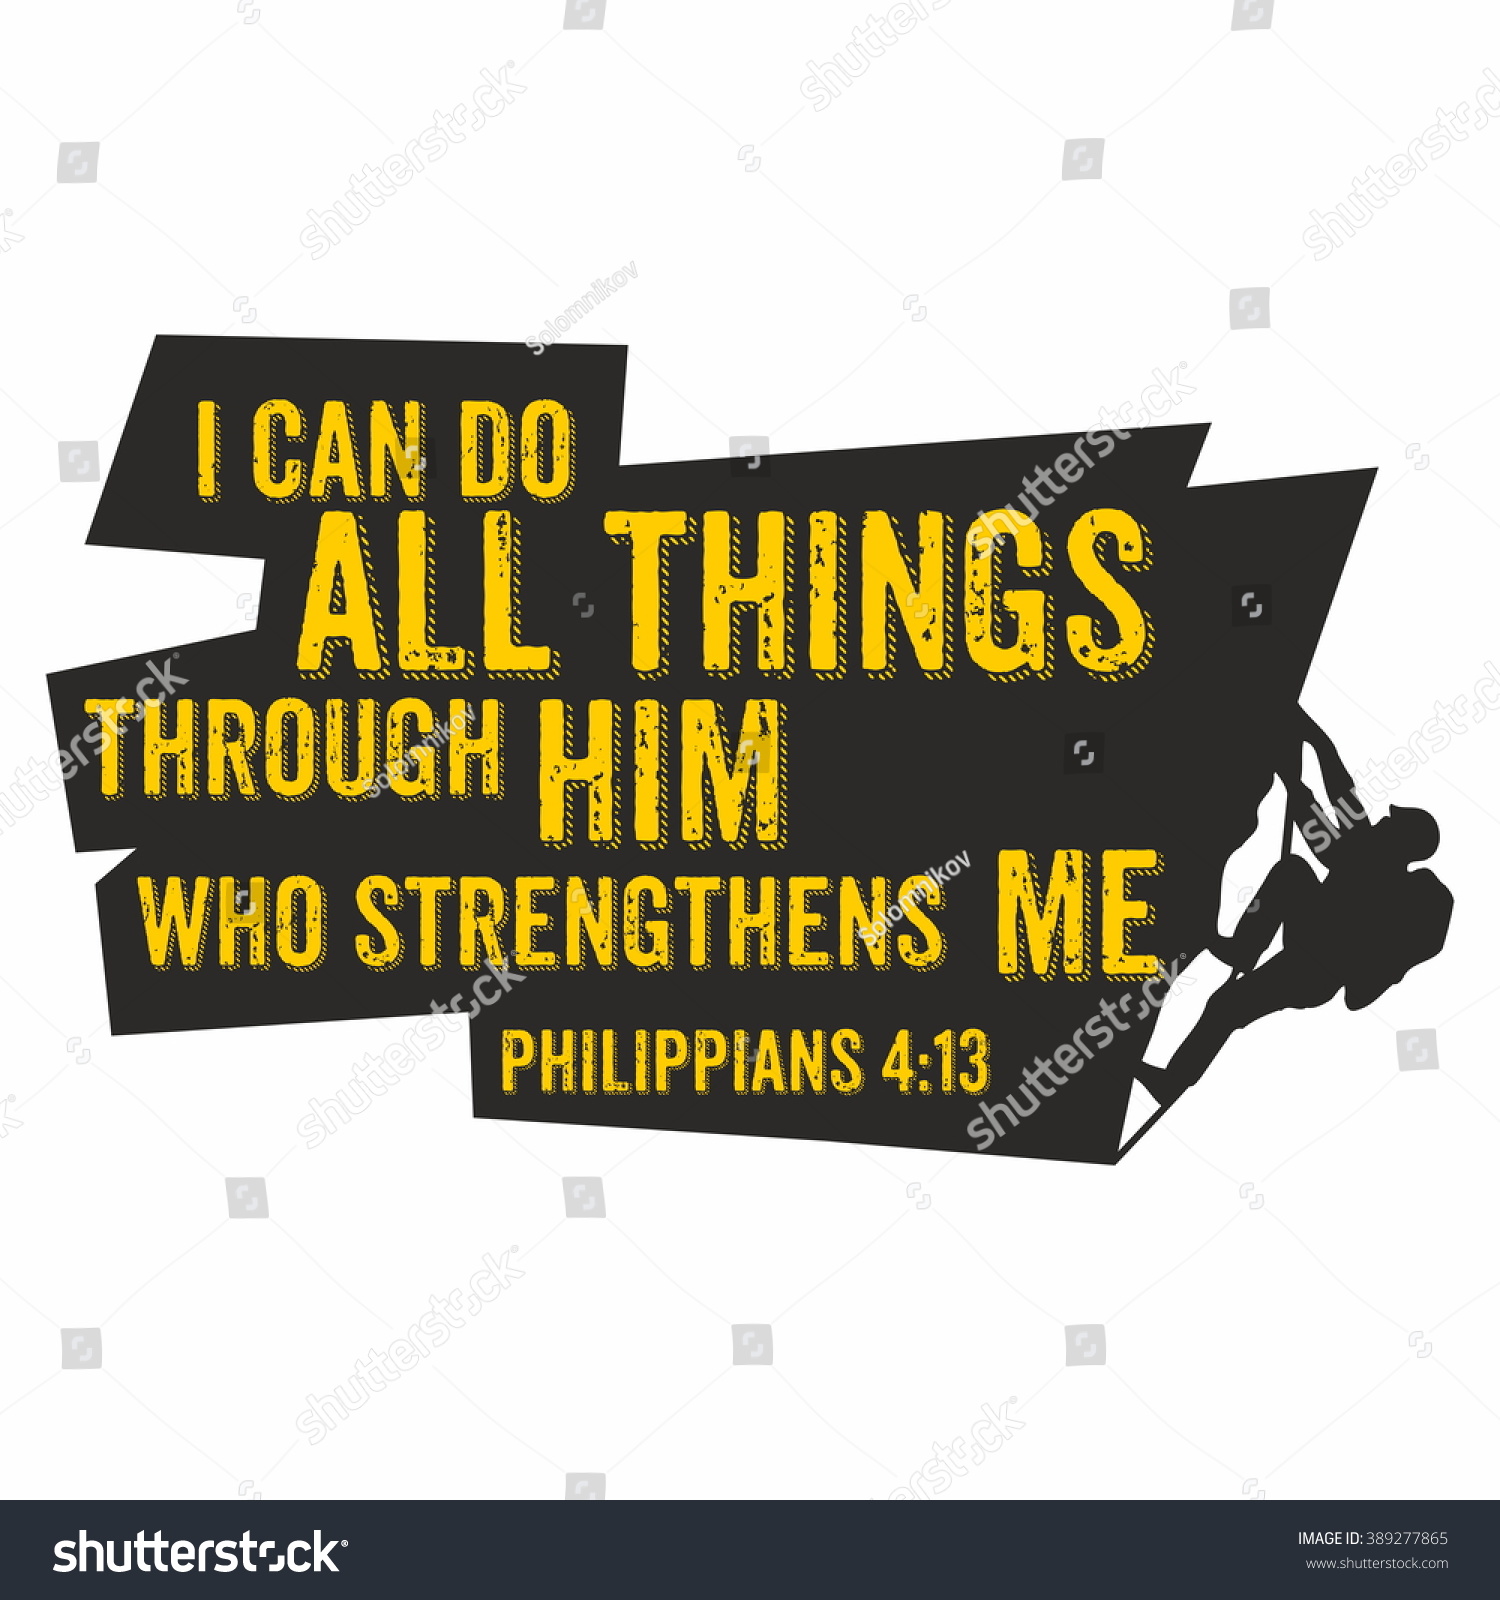 SVG of Biblical illustration. I can do all things through Him who strengthens me svg